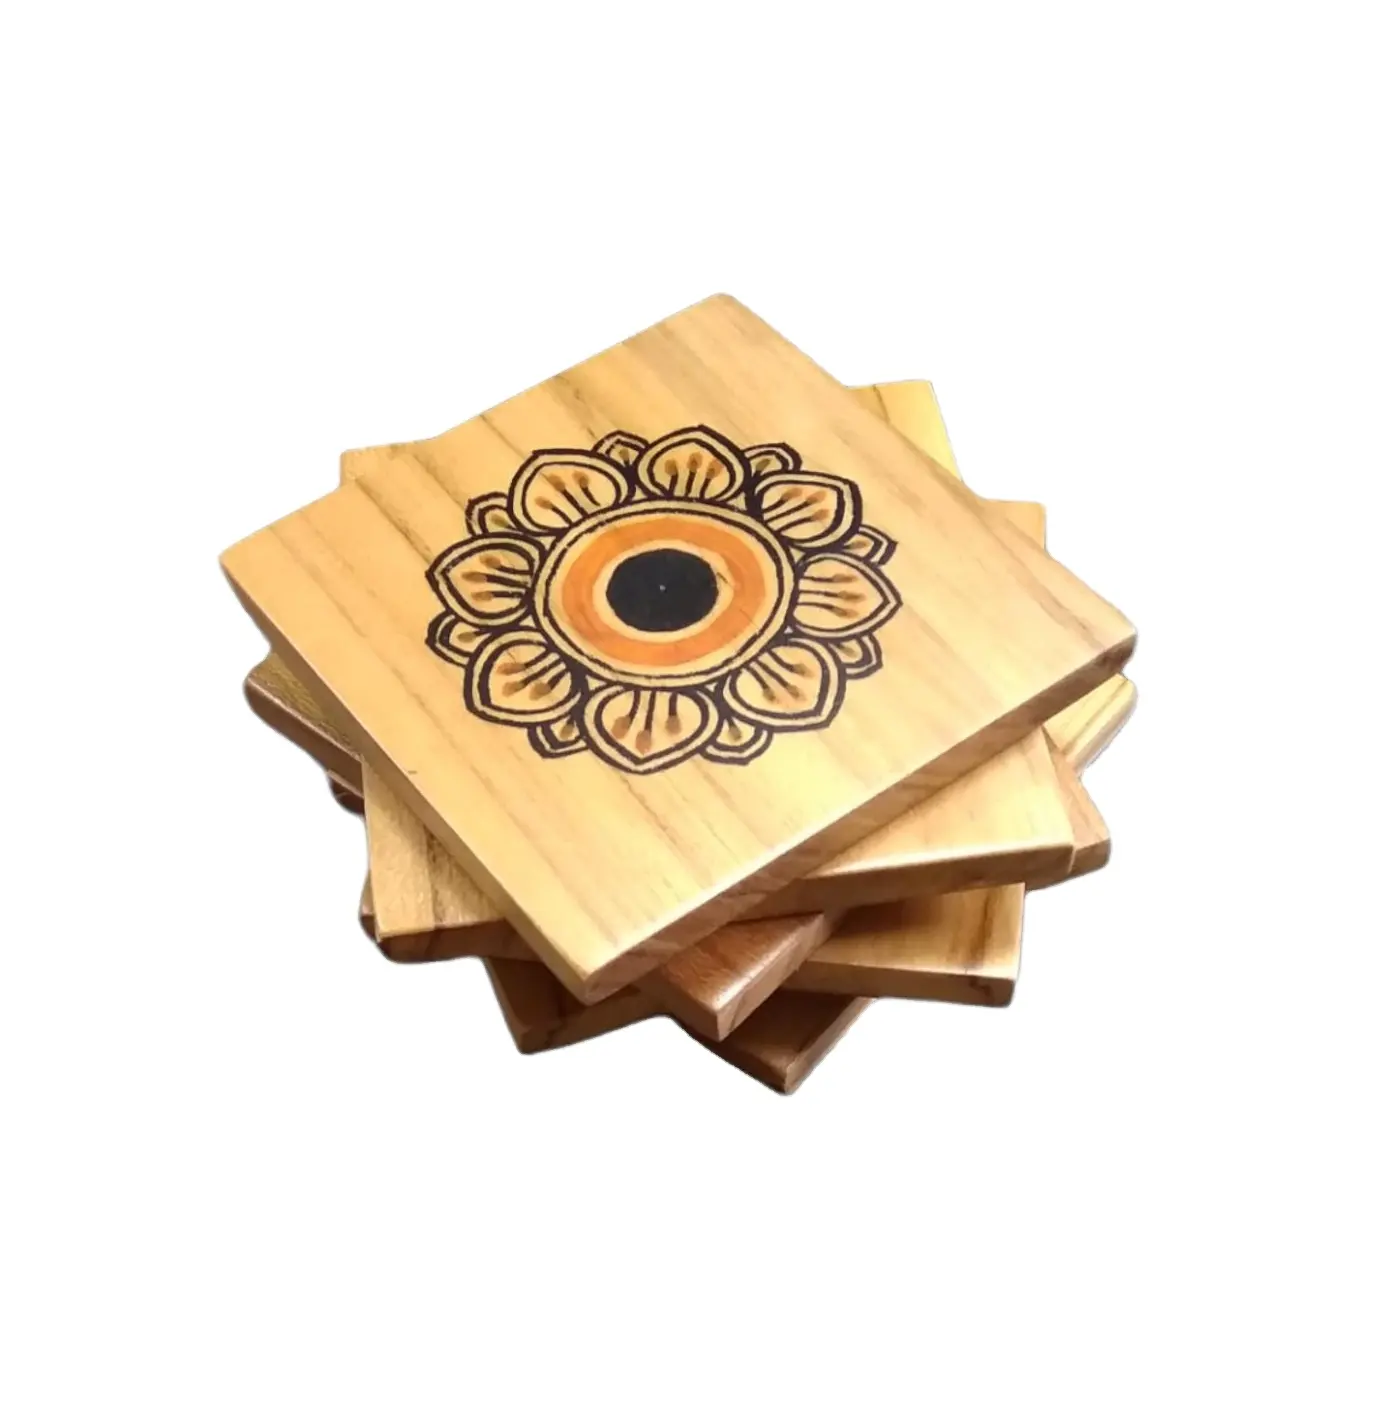 Hot Selling Wood Coaster Kitchen Accessories Tableware Product Indian Handicrafts For Export At Wholesale Serving wood coaster